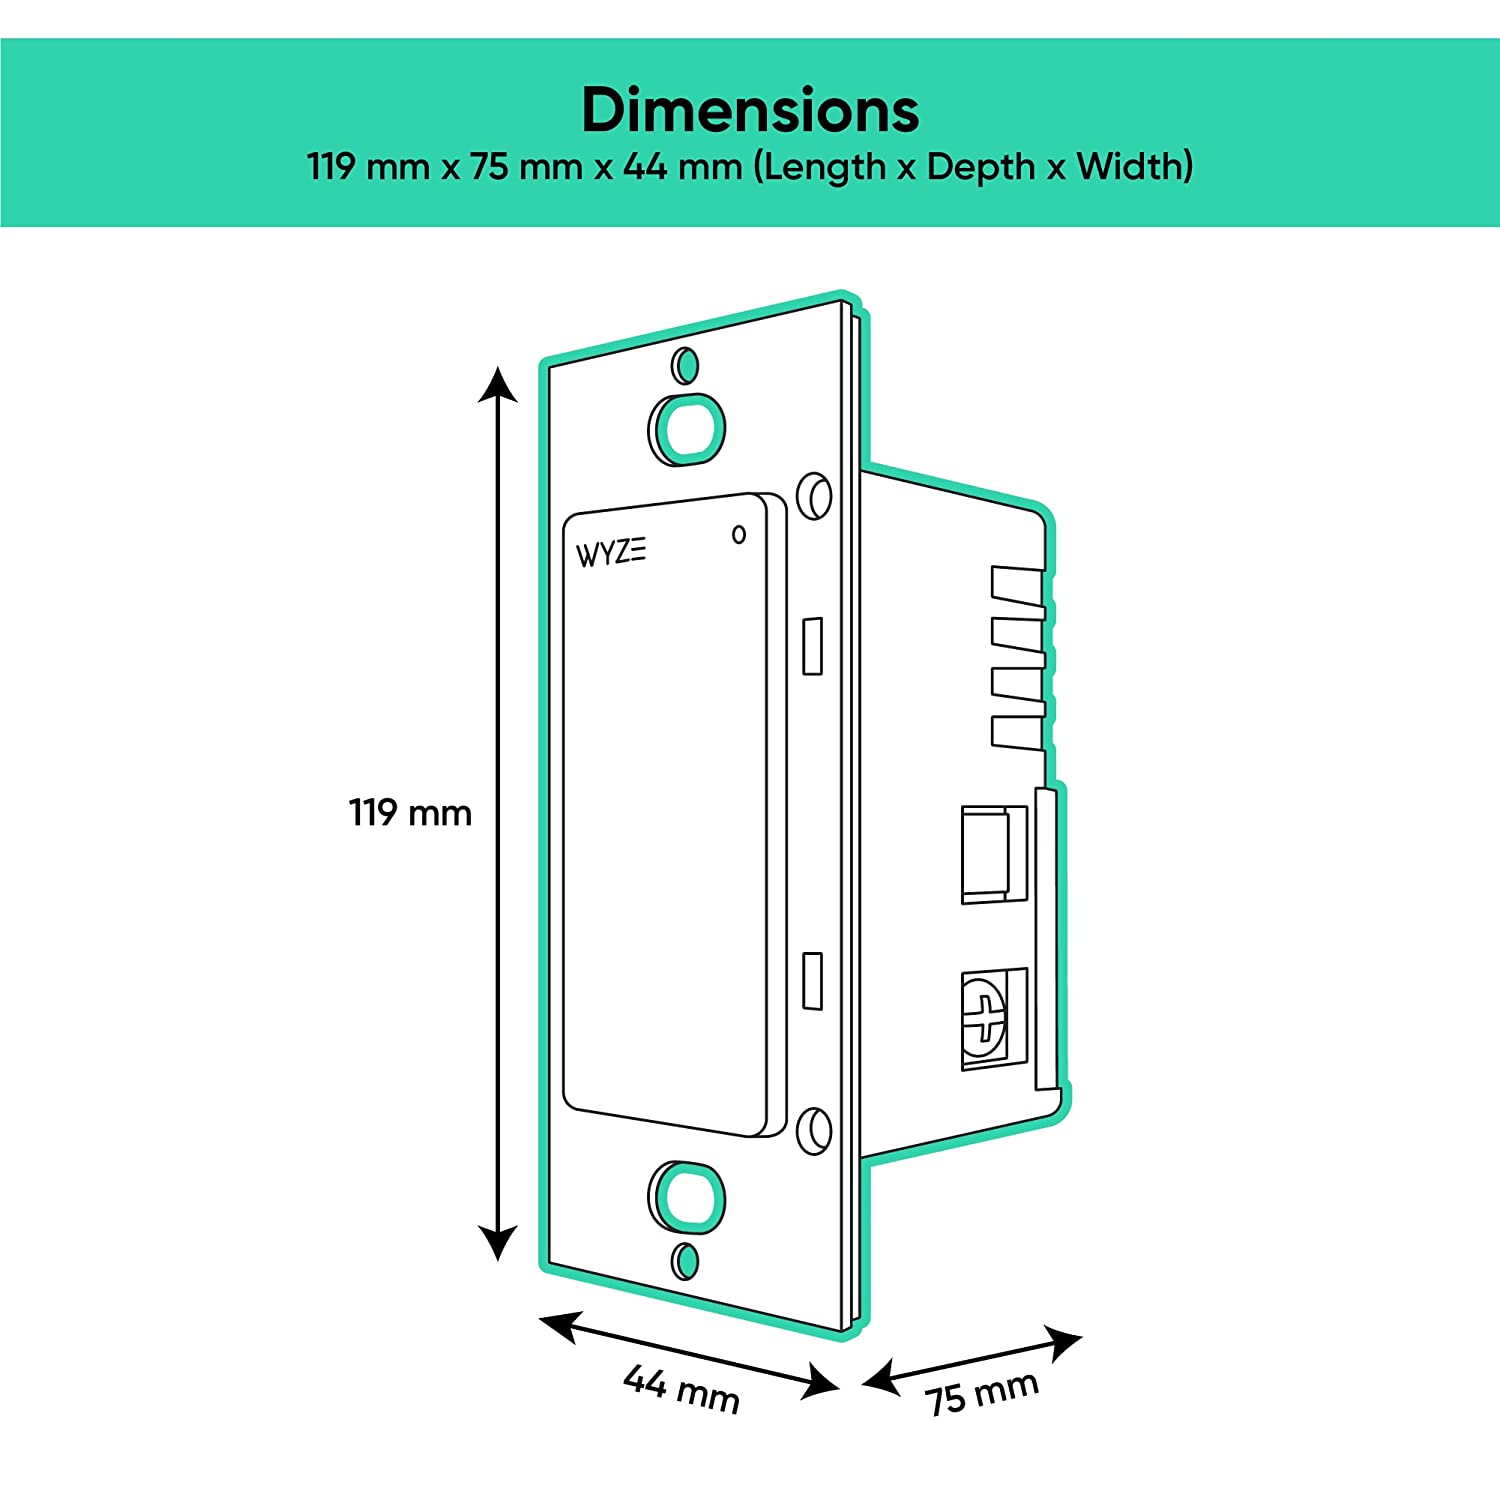 Wyze Switch with dimensions labelled. Text overlay that says "119mm x 75mm x 44mm (Length x Depth x Width)."